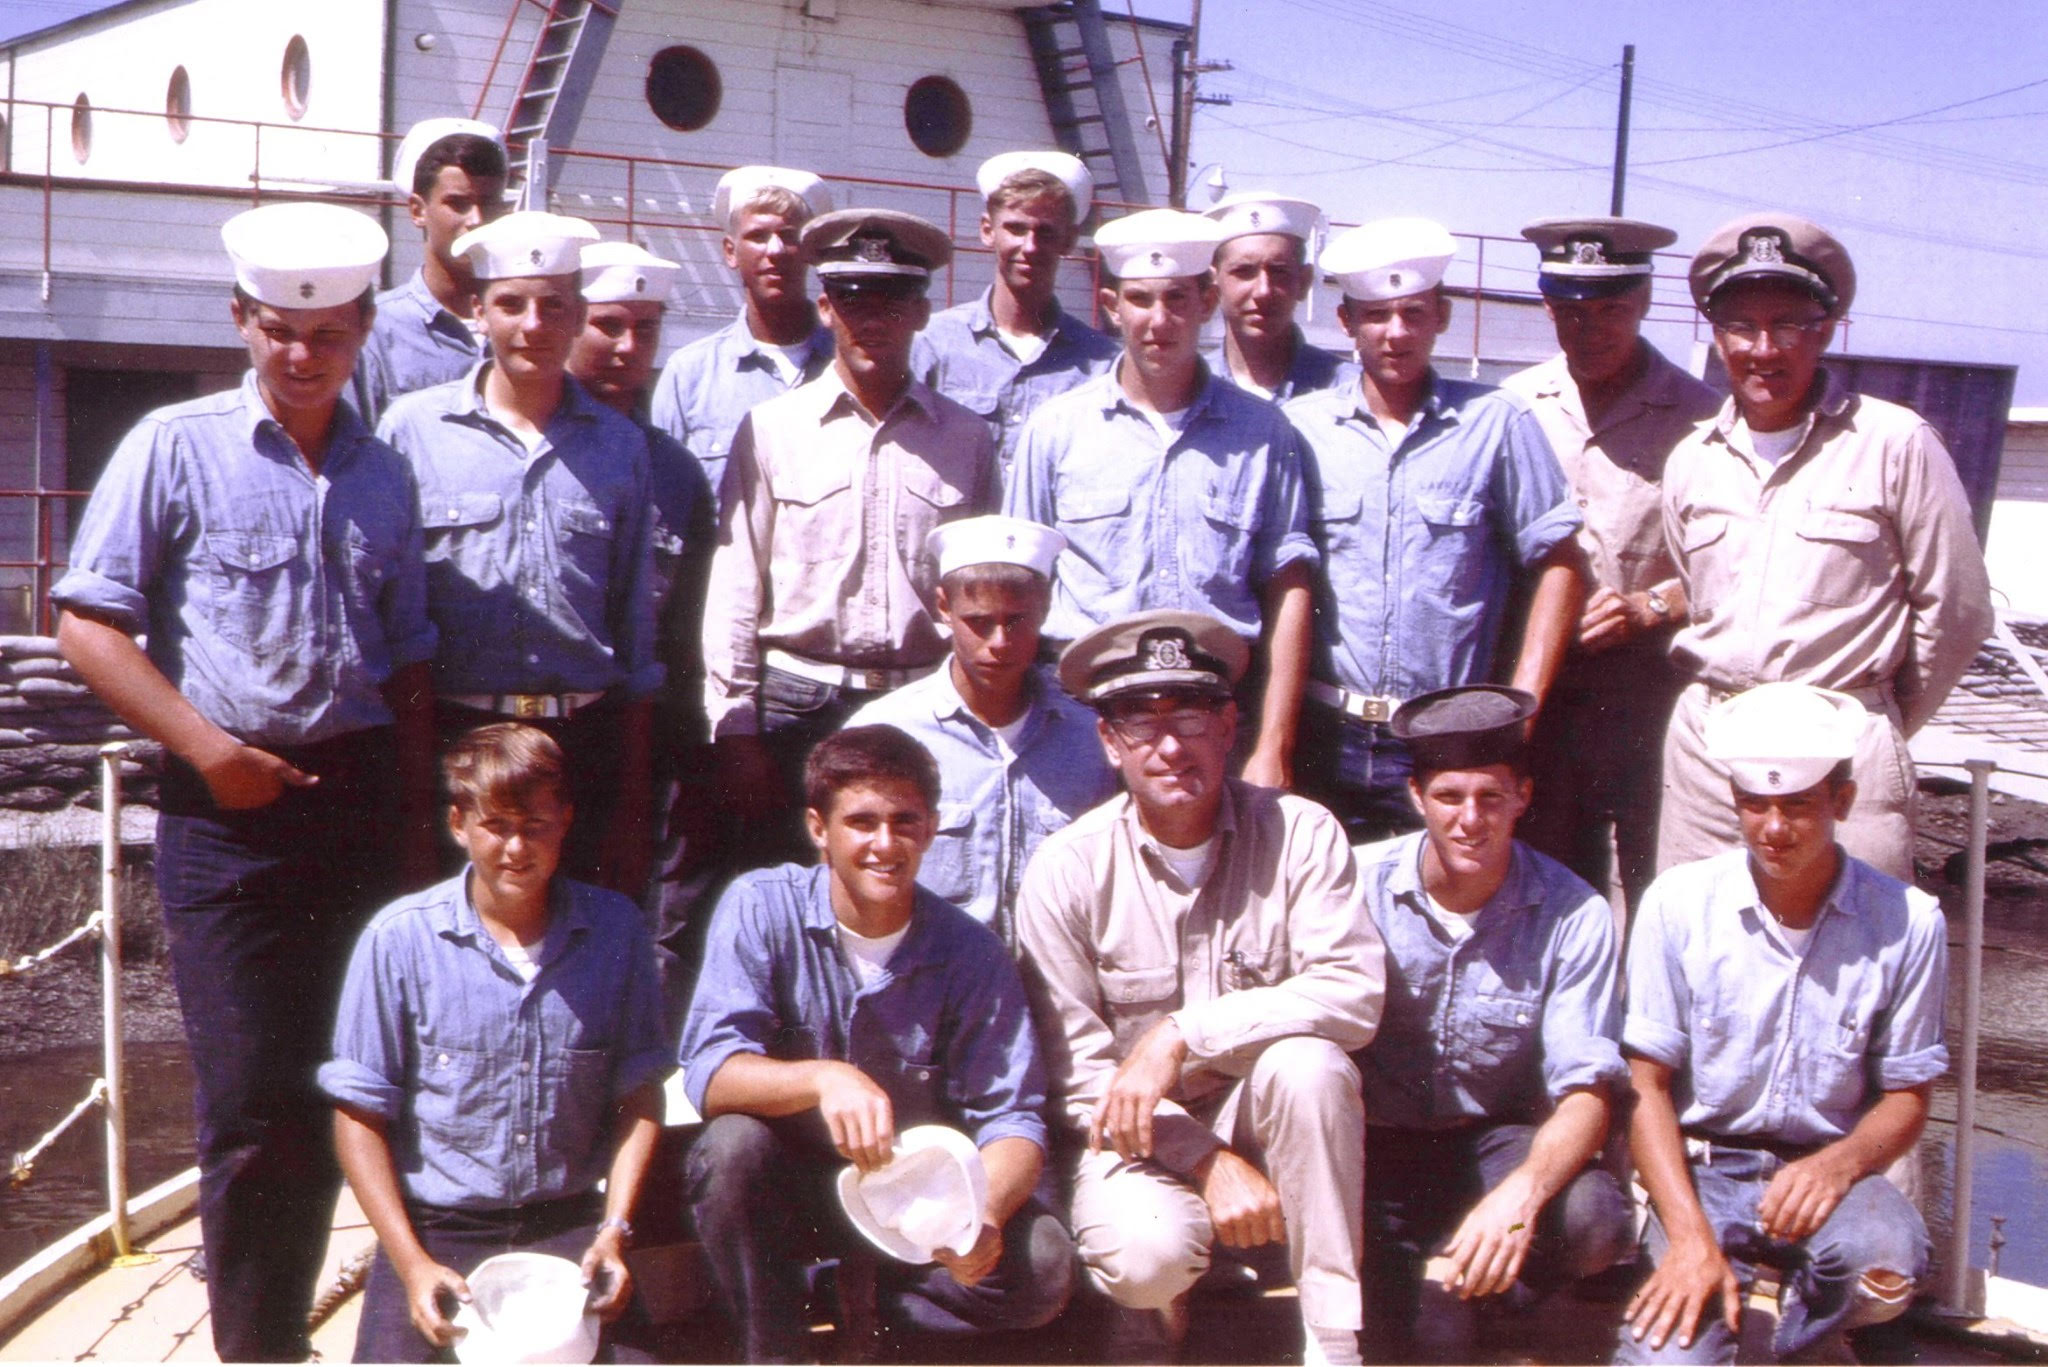 A class photo taken outdoors of young, teenage boys looking jaunty in sailor outfits.